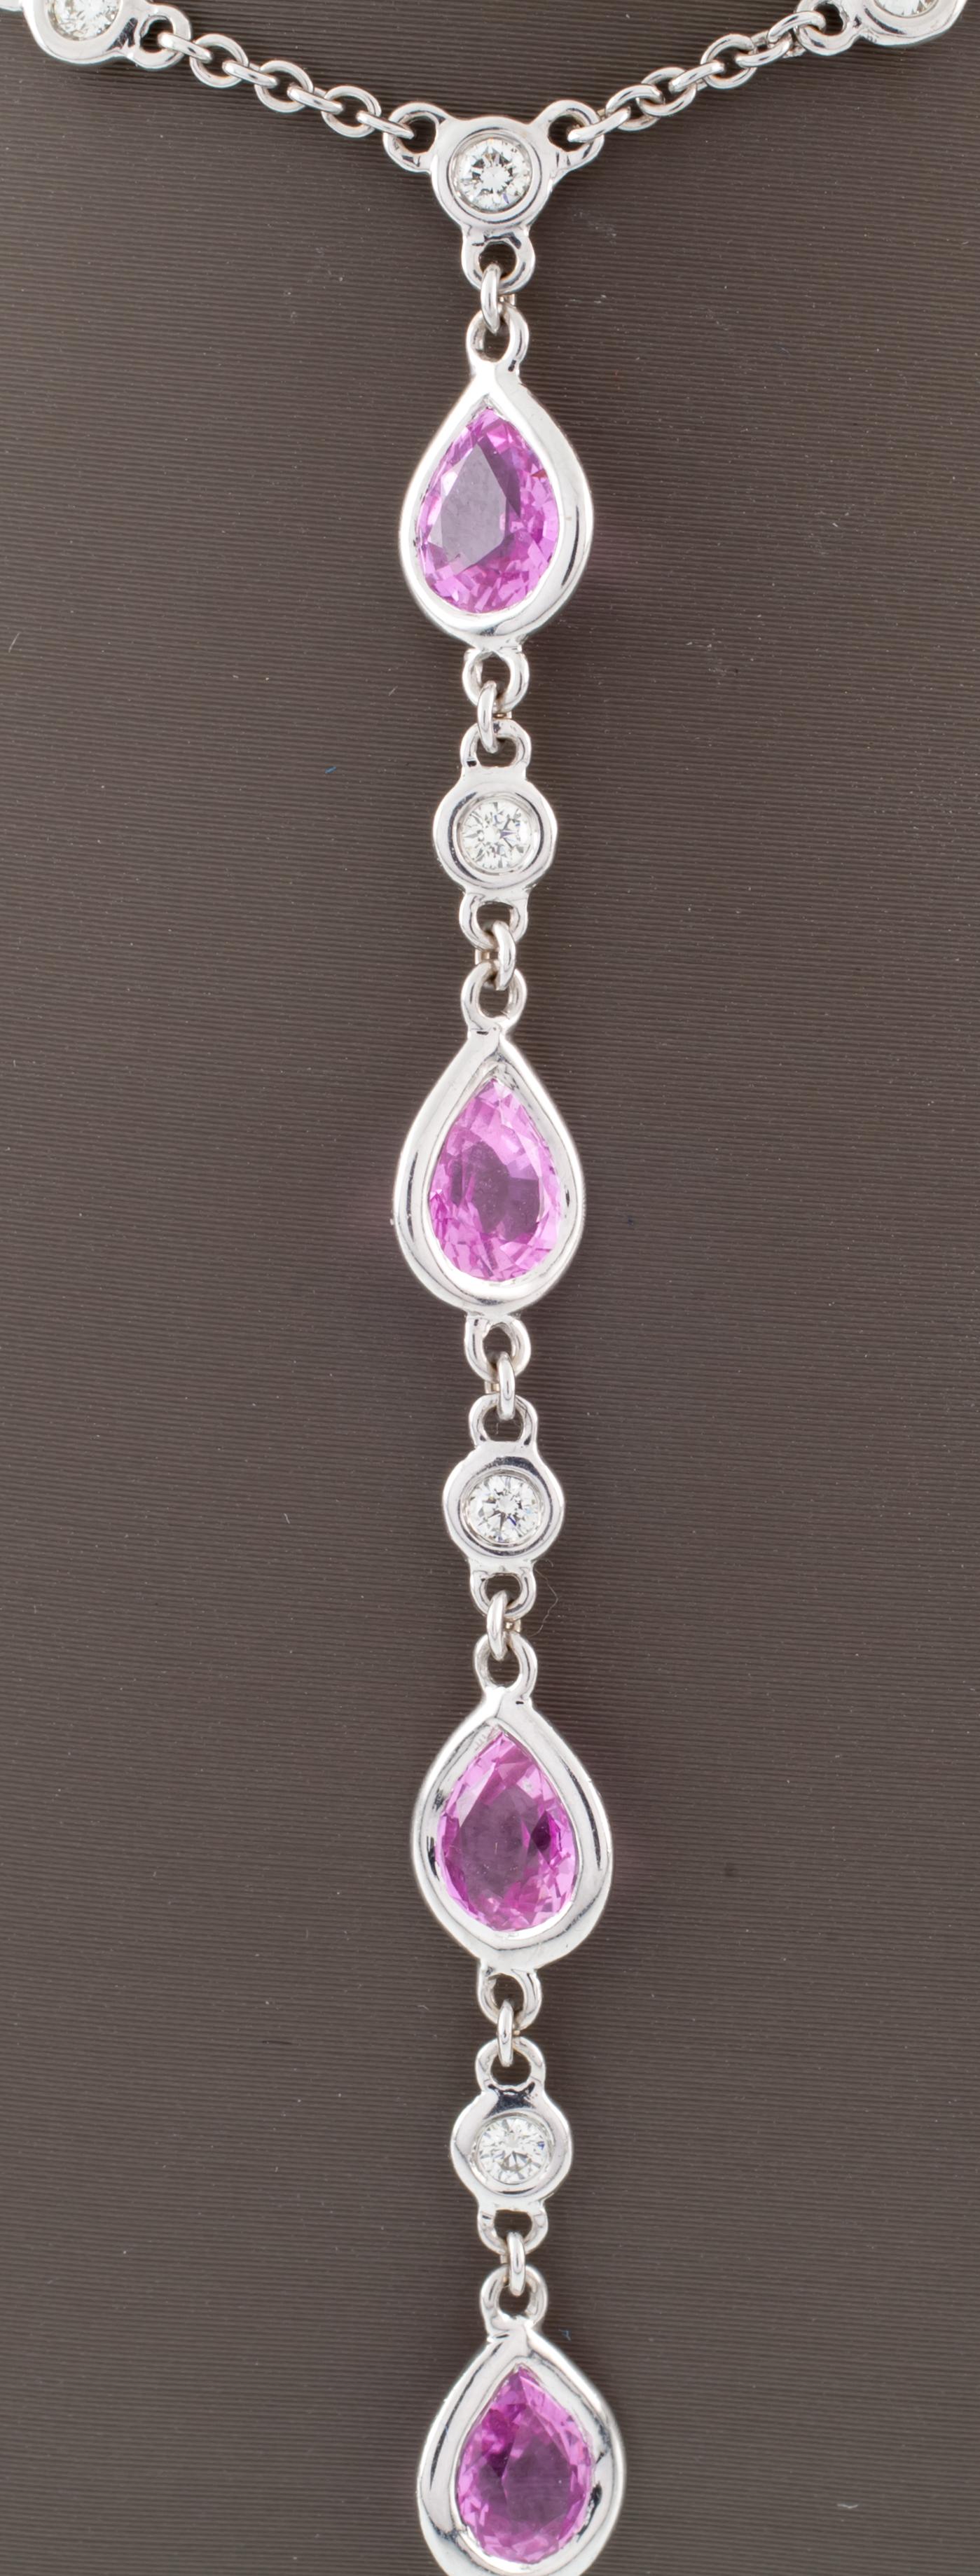 Gorgeous Pink Sapphire and Diamond Necklace
Features Bezel-Set Pear-Shaped Pink Sapphires in a Drop at Front
Length of Drop = 70 mm
18k Chain Features Periodic Bezel Set Round Diamonds in 